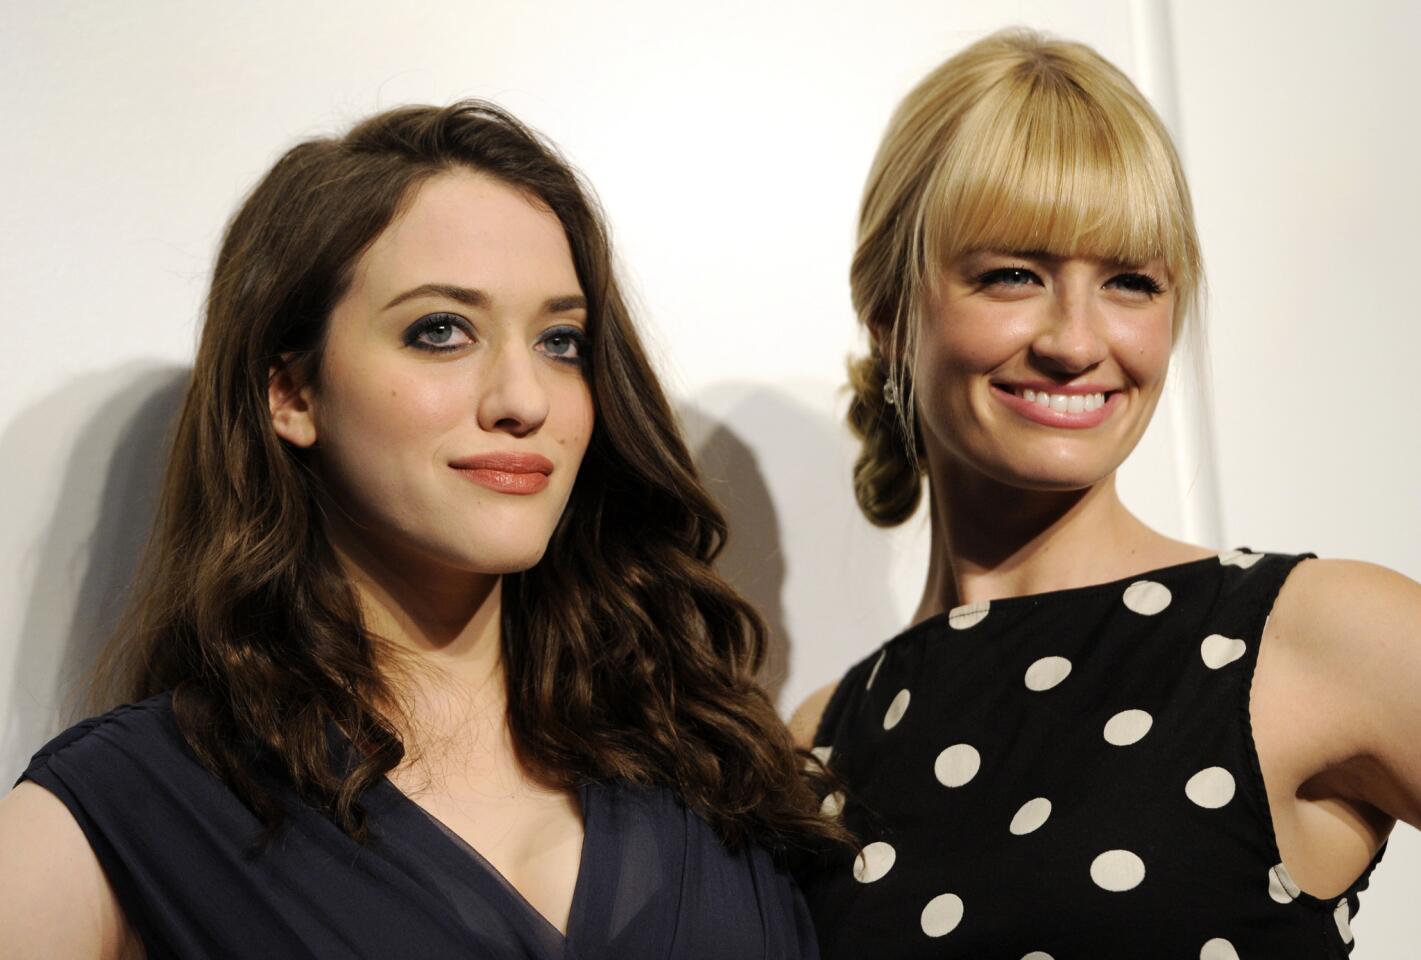 Kat Dennings, left, and Beth Behrs, from the television series "2 Broke Girls," will be co-hosting the 2014 People's Choice Awards.